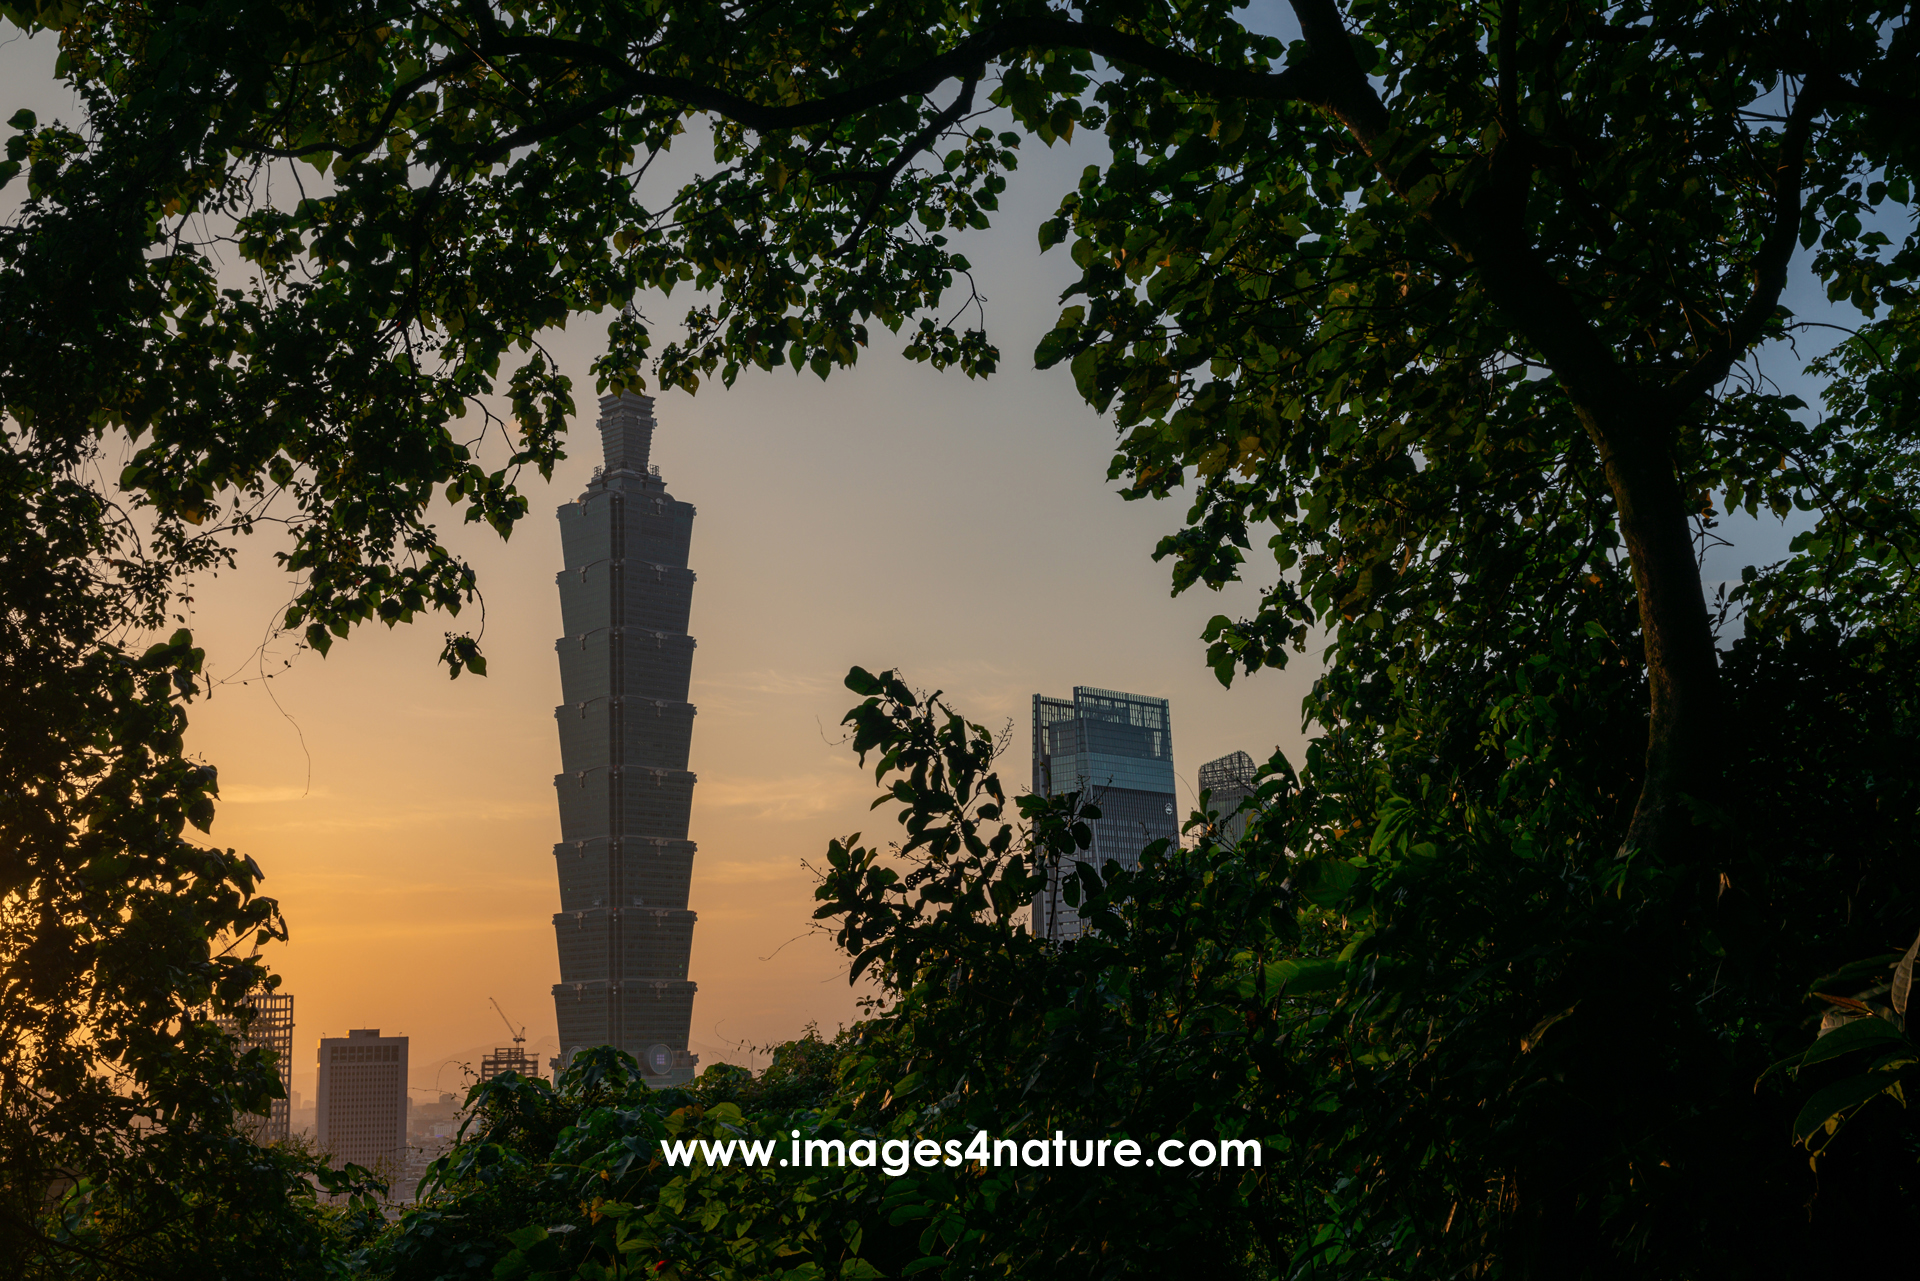 Evening view of Taipei 101 against a colorful sunset sky, framed by trees of a subtropical forest